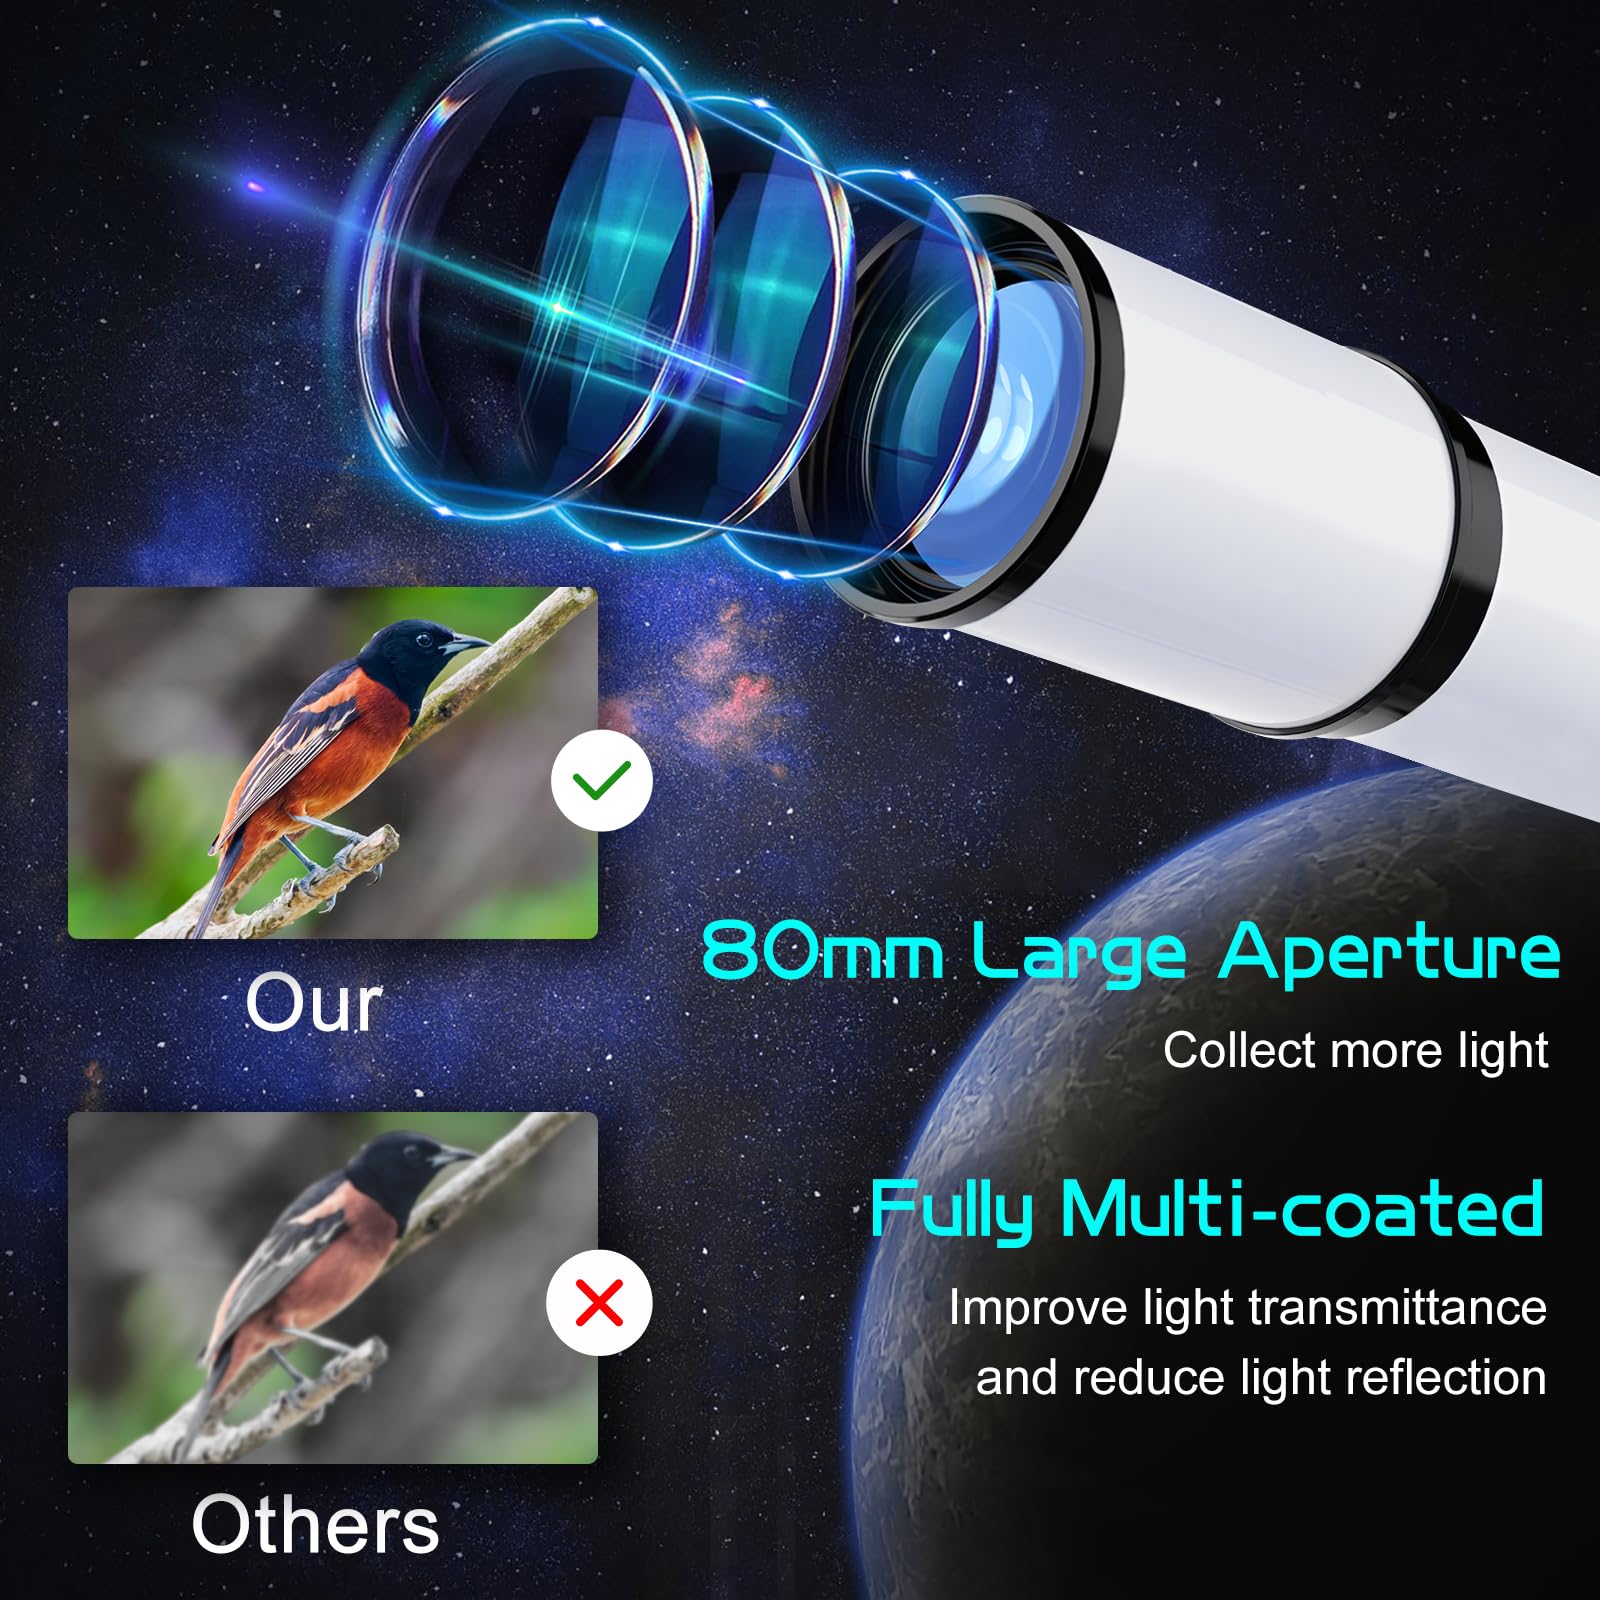 ABOTEC Telescope, 80mm Aperture Telescopes for Adults Astronomy & Kids & Beginners, Portable 500mm Refracting Telescope with an Adjustable Tripod, a Bag, a Phone Adapter & a Wireless Remote